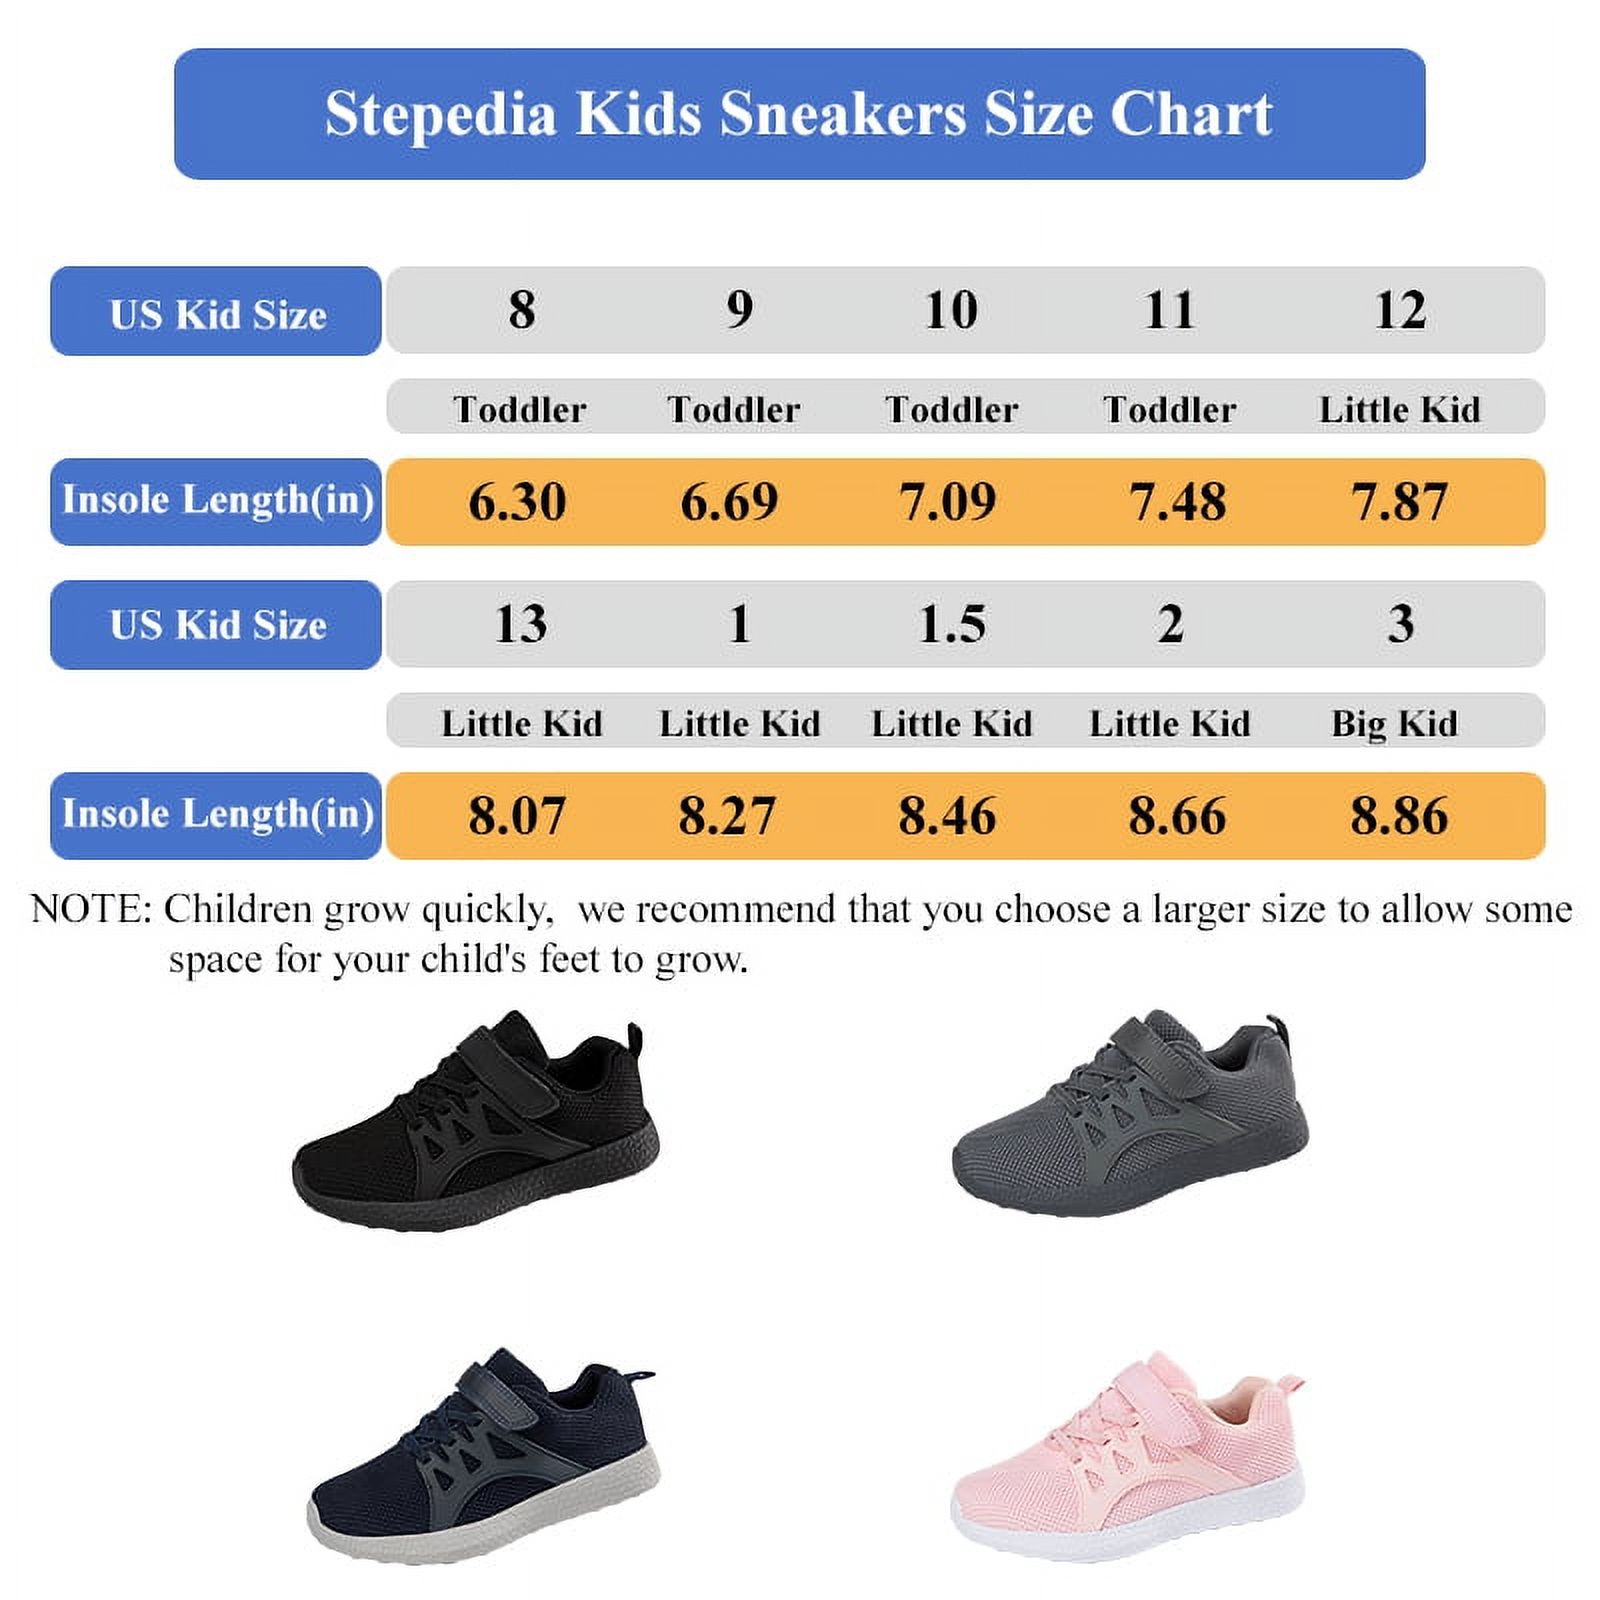 Stepedia Boys Girls Tennis Shoes Kids Lightweight Breathable Sneakers Knit Running Athletic Shoes Pink, Size 11 - image 2 of 6